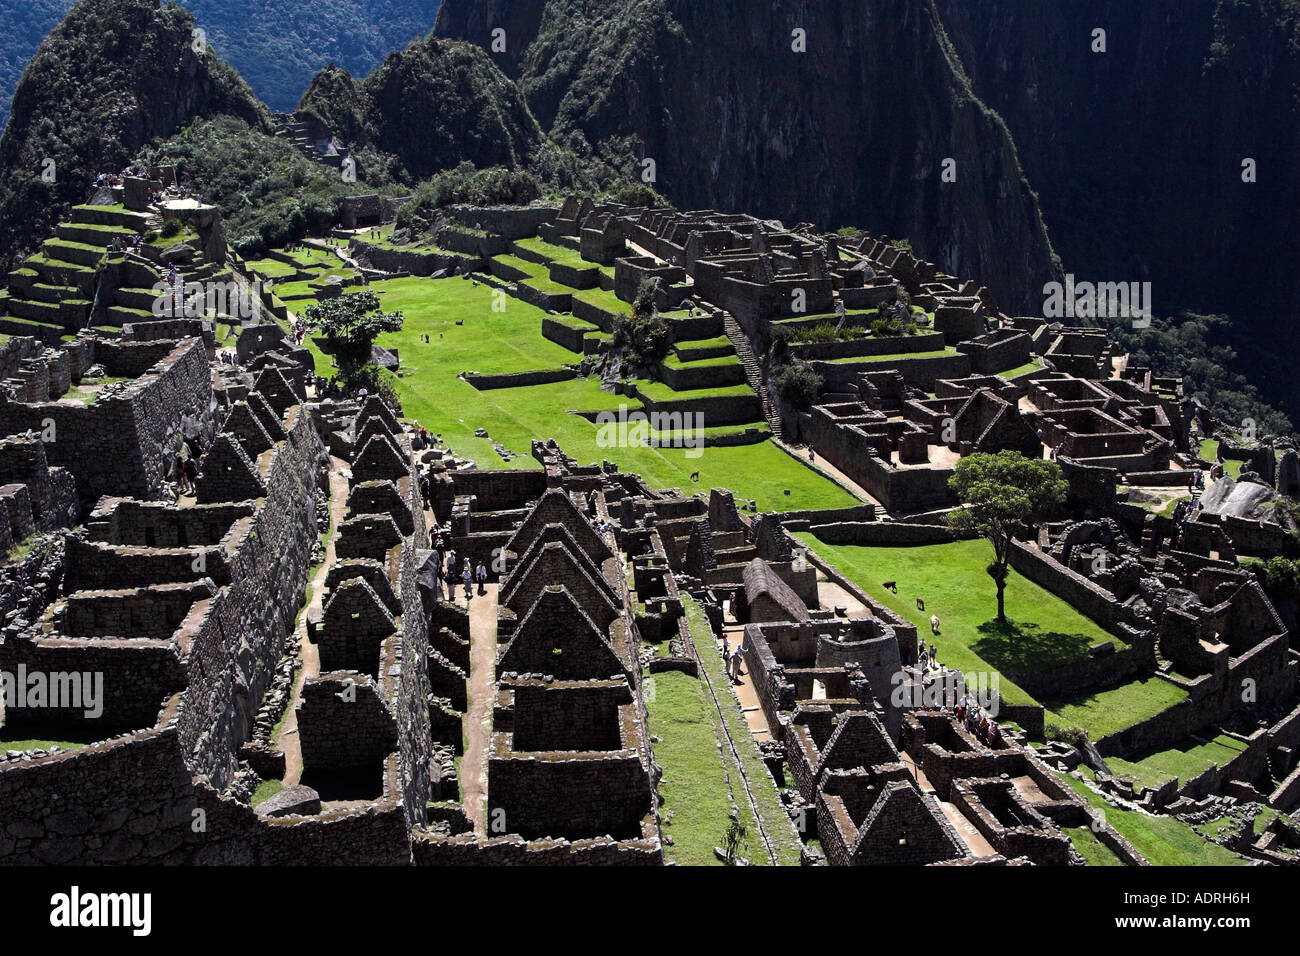 [Machu Picchu], [Lost City of the Incas], Peru, view over ancient ruins, 'South America', [UNESCO World Heritage Site] Stock Photo